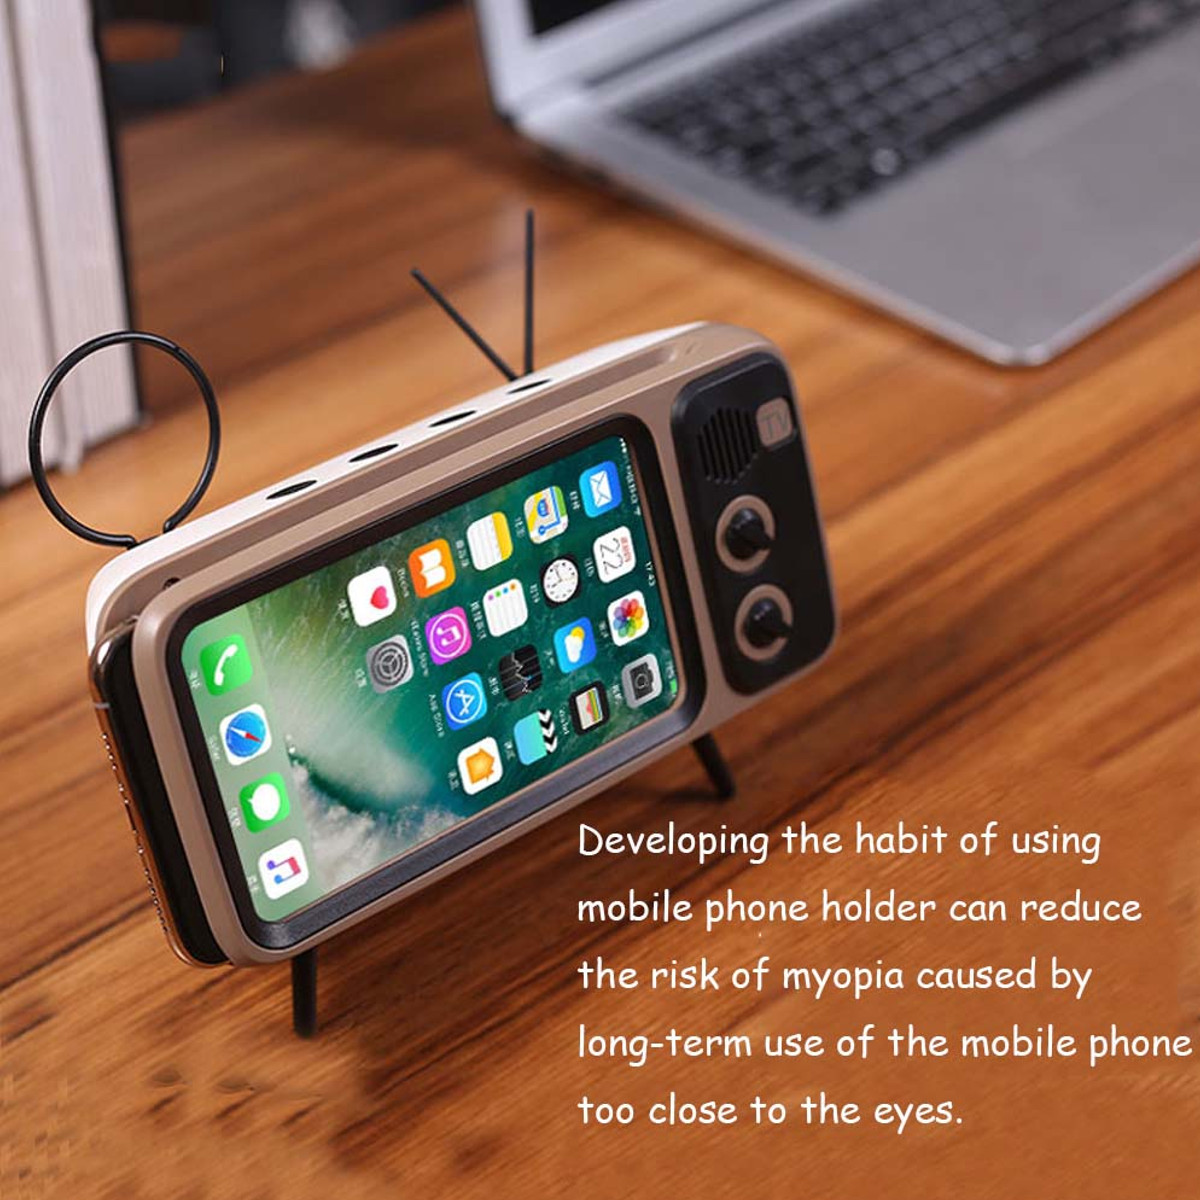 Bakeey Mini Retro TV Pattern bluetooth Speaker Desktop Cell Phone Stand Holder Lazy Bracket for Mobile Phone between 4.7 inch to 5.5 inch